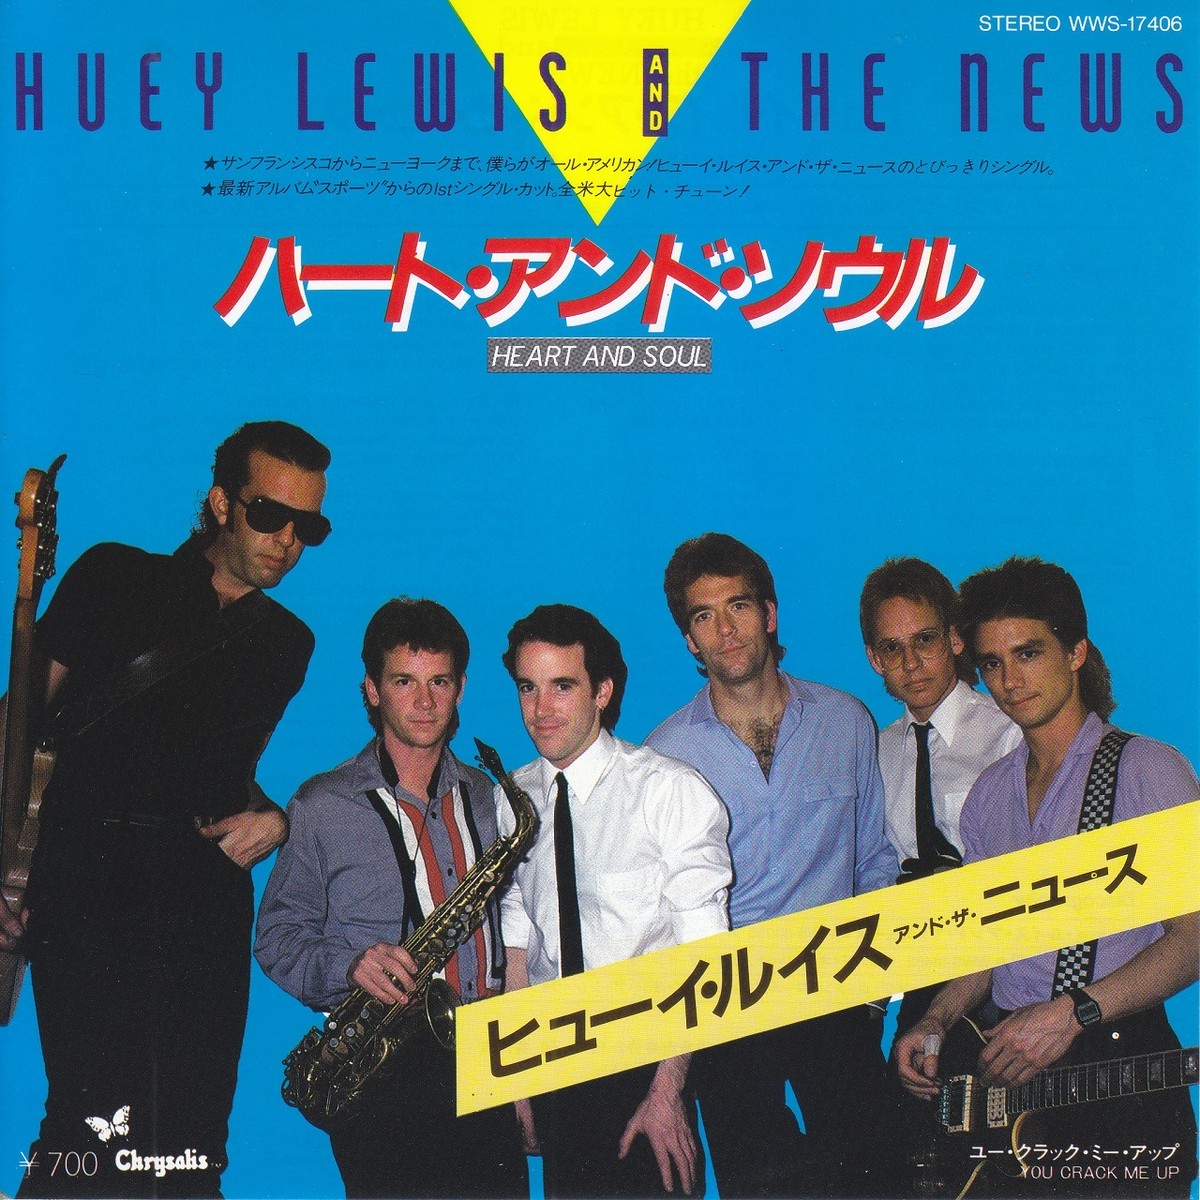 7inch Huey Lewis And The News Heart And Soul ハート アンド ソウル ヒューイ ルイスアンド ザ ニュース 19 08 45rpm 45rpm